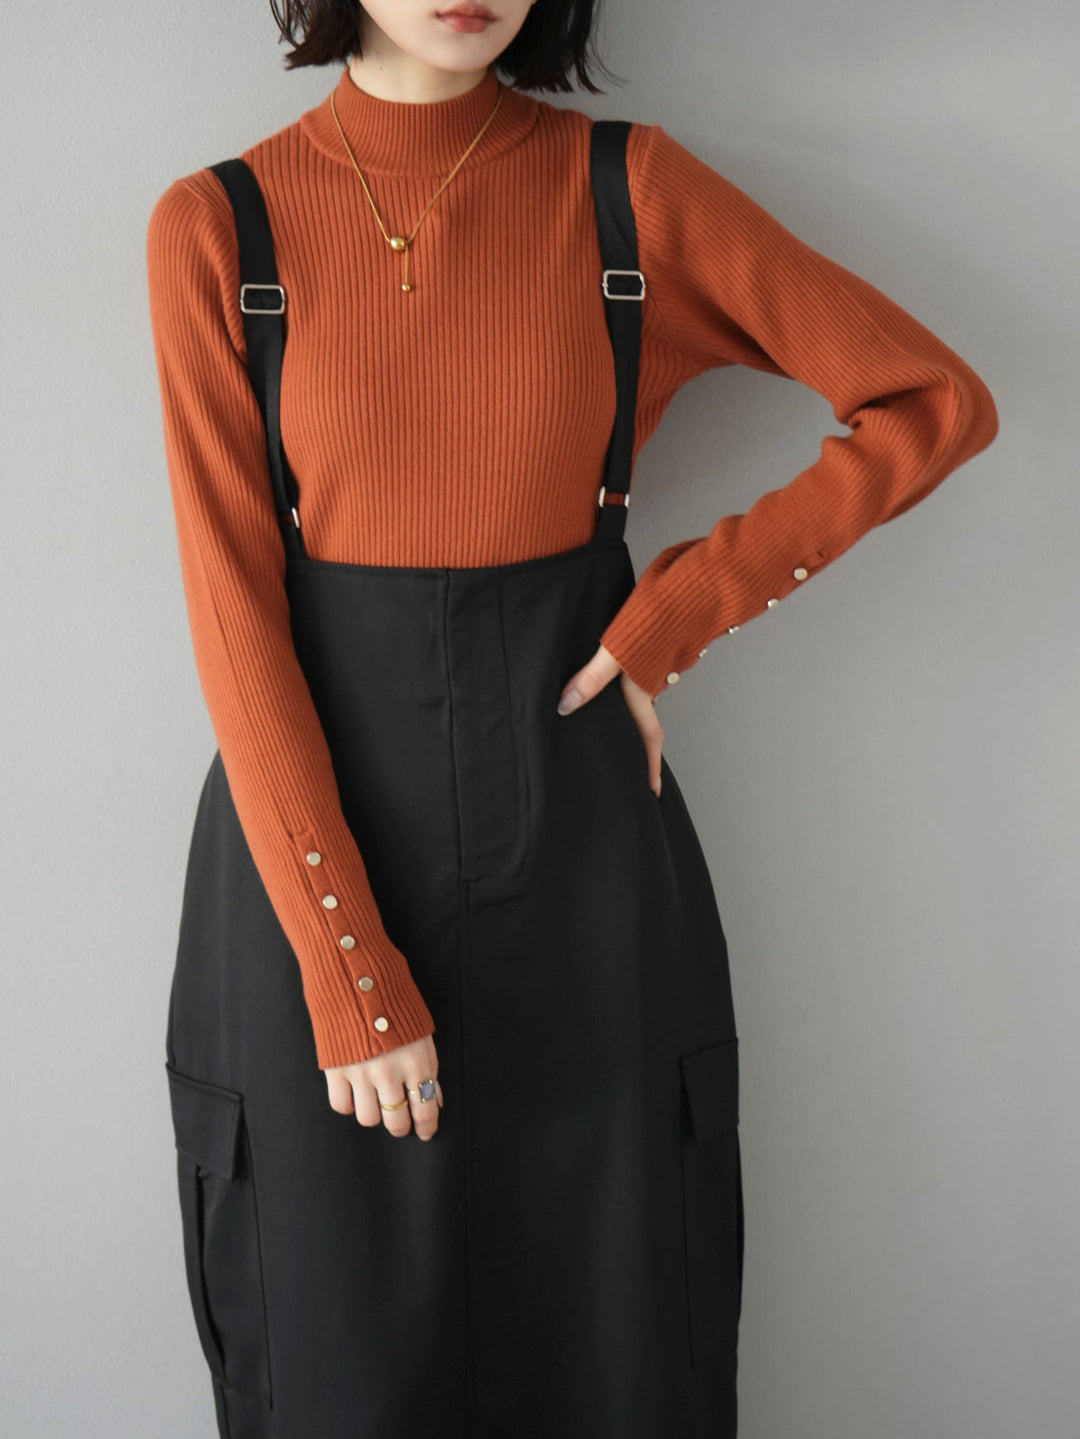 [SET] Sleeve button bottle neck ribbed knit top + sleeve button bottle neck ribbed knit top (2 sets)